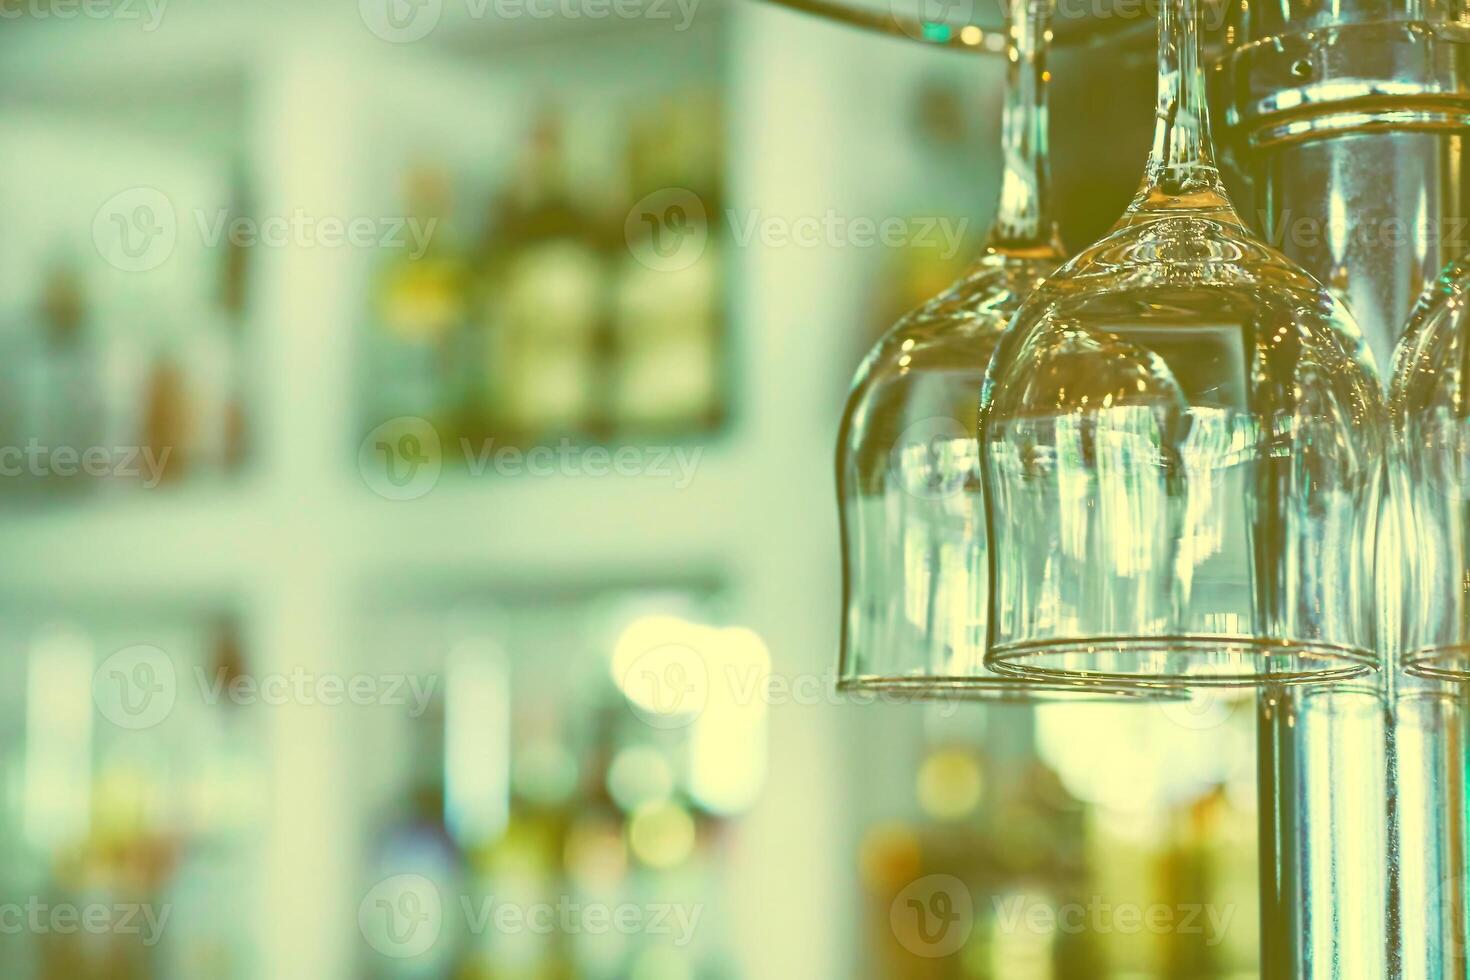 Wine glasses hanging on the bar counter in a cafe or restaurant photo